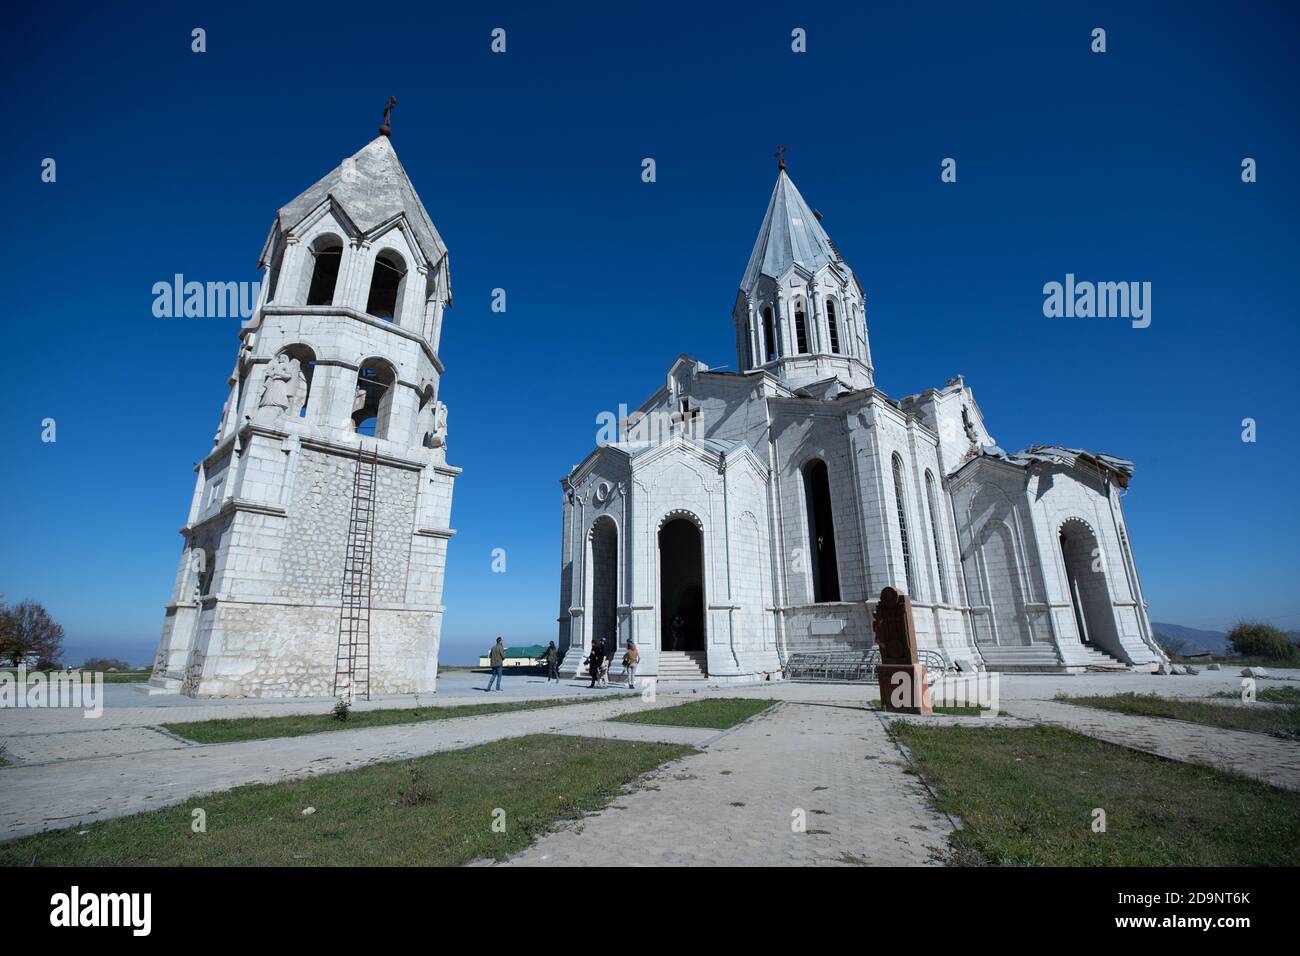 STEPANAKERT, ARTSAKH - Nov 05, 2020: Ghazanchetsots Cathedral in Shushi still standing after a double missile strike by Azerbaijani armed forces Stock Photo